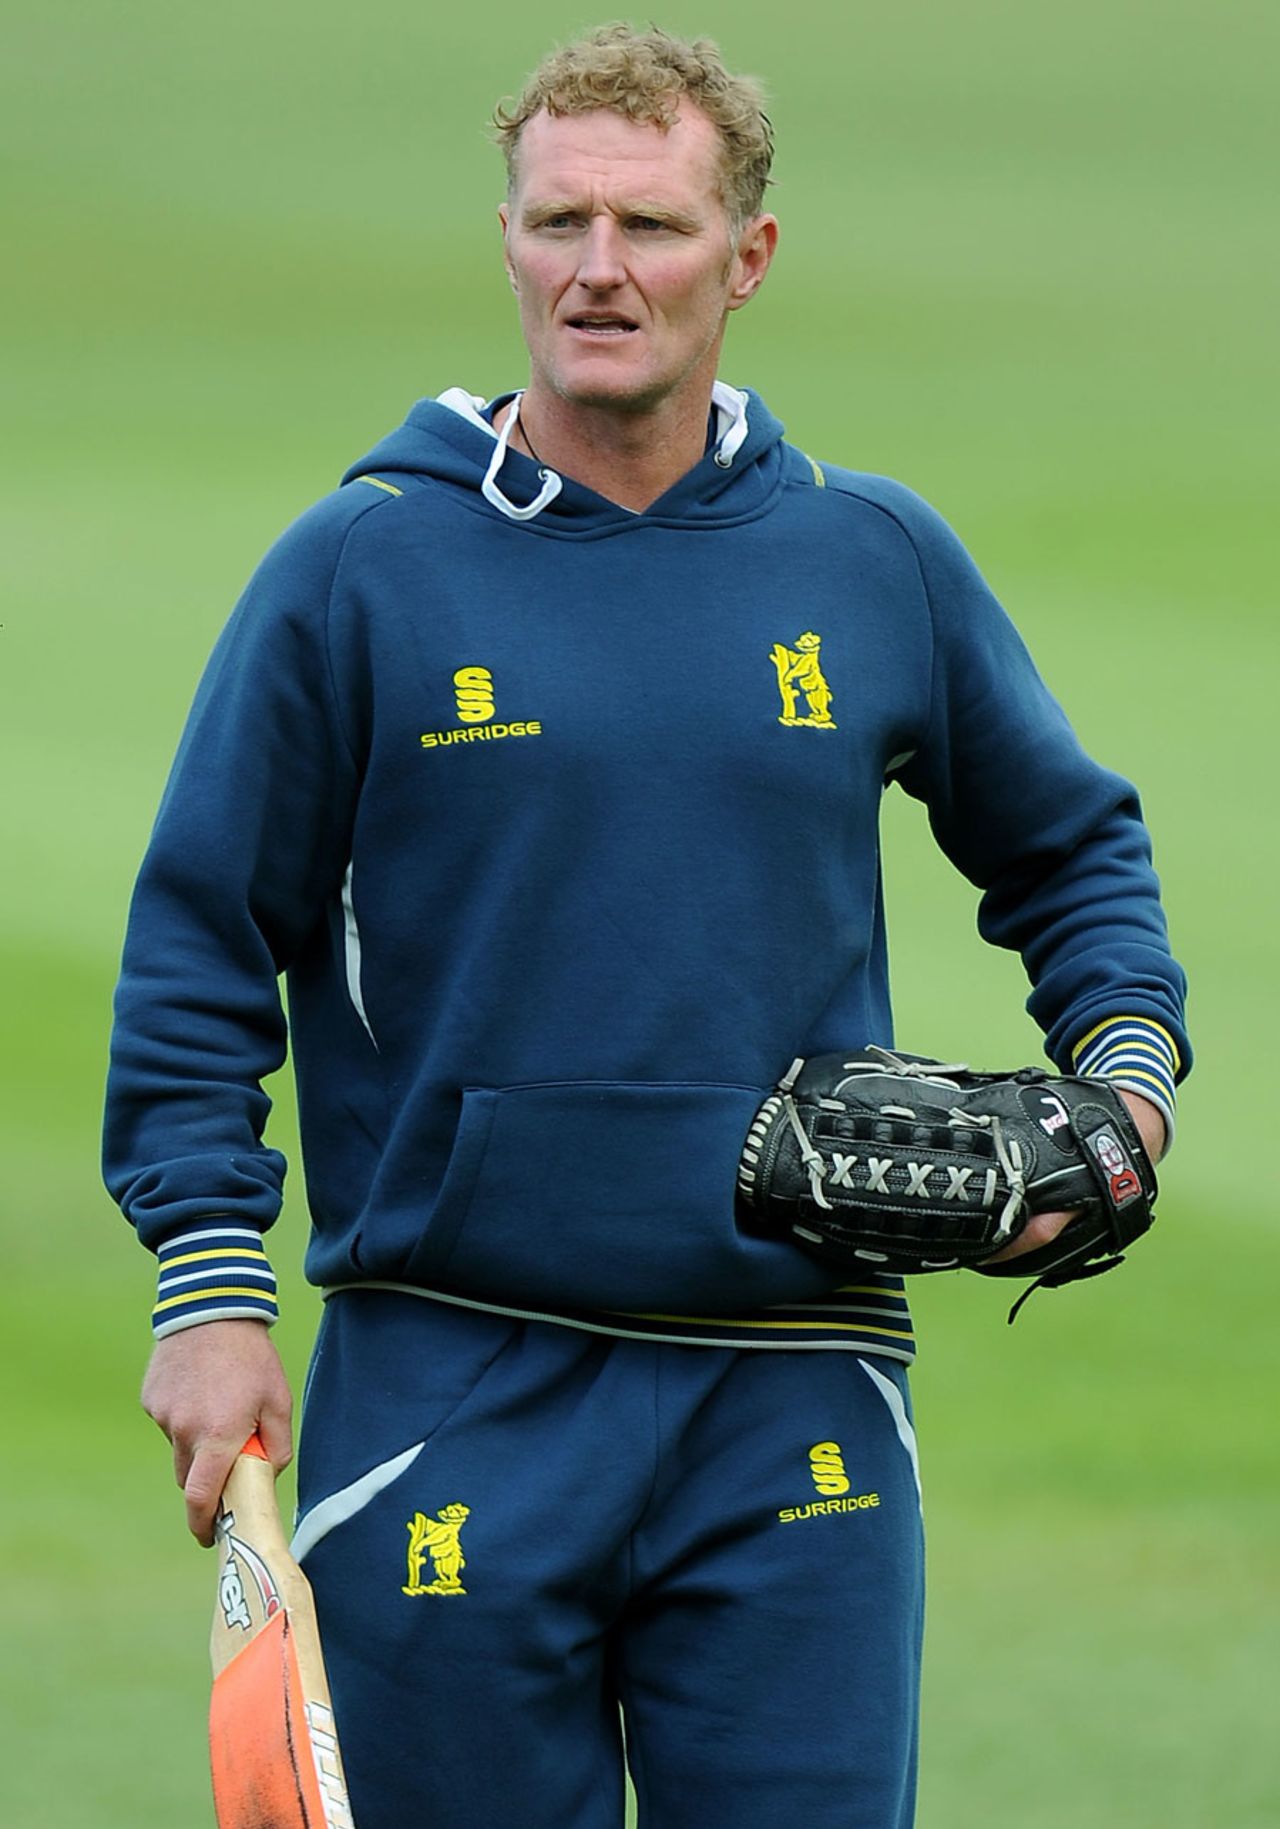 Dougie Brown is concerned at his side's position, Warwickshire v Yorkshire, County Championship, Division One, Edgbaston, 1st day, May, 15, 2013